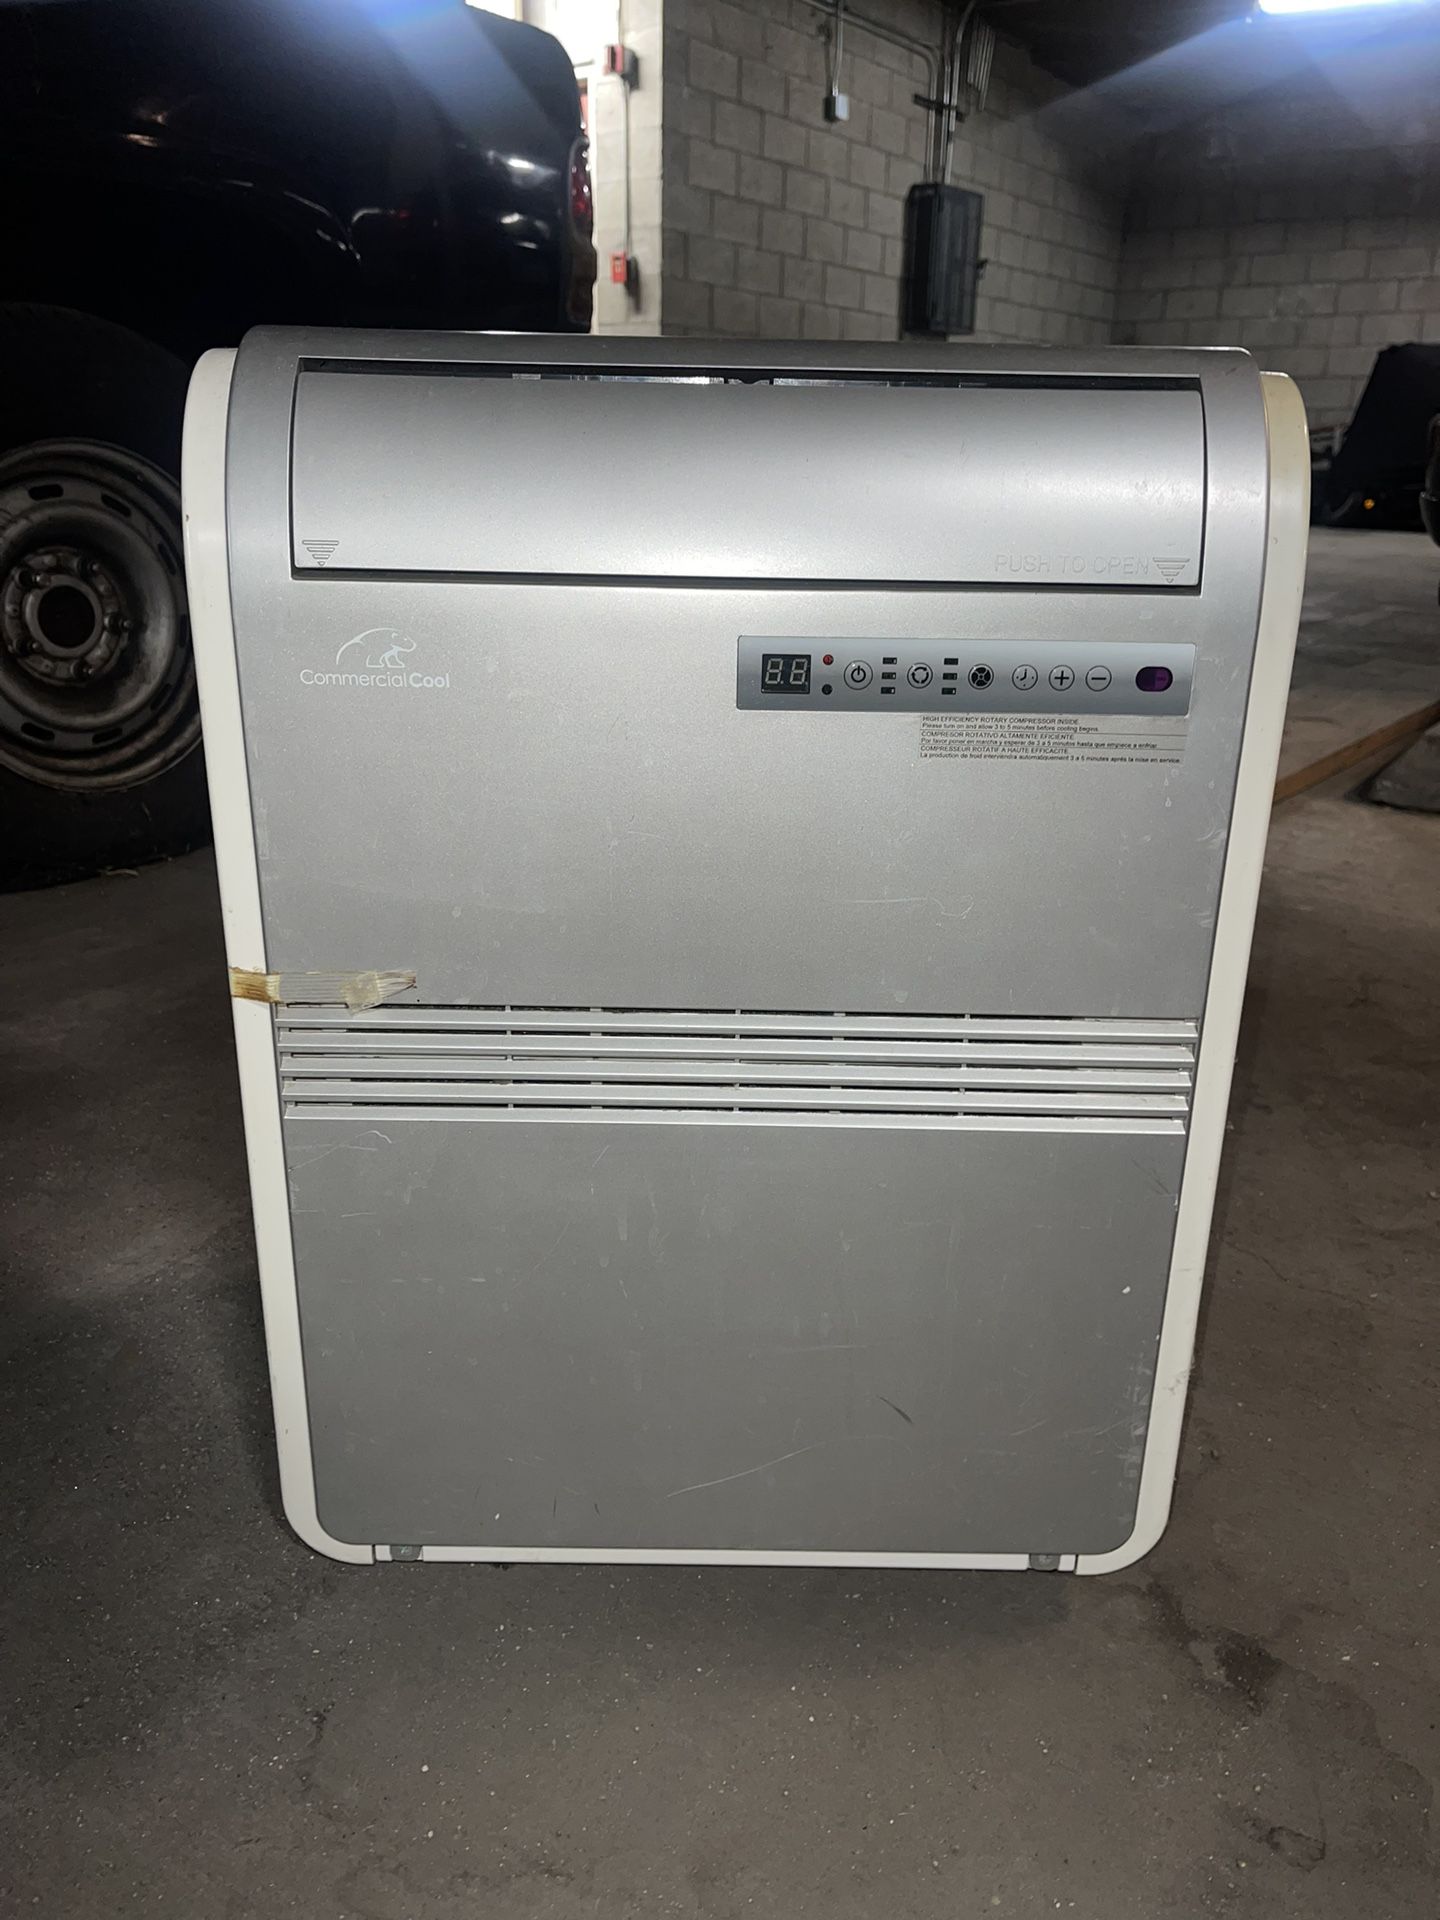 CommercialCool Portable AIR Conditioner AC UNIT with Remote